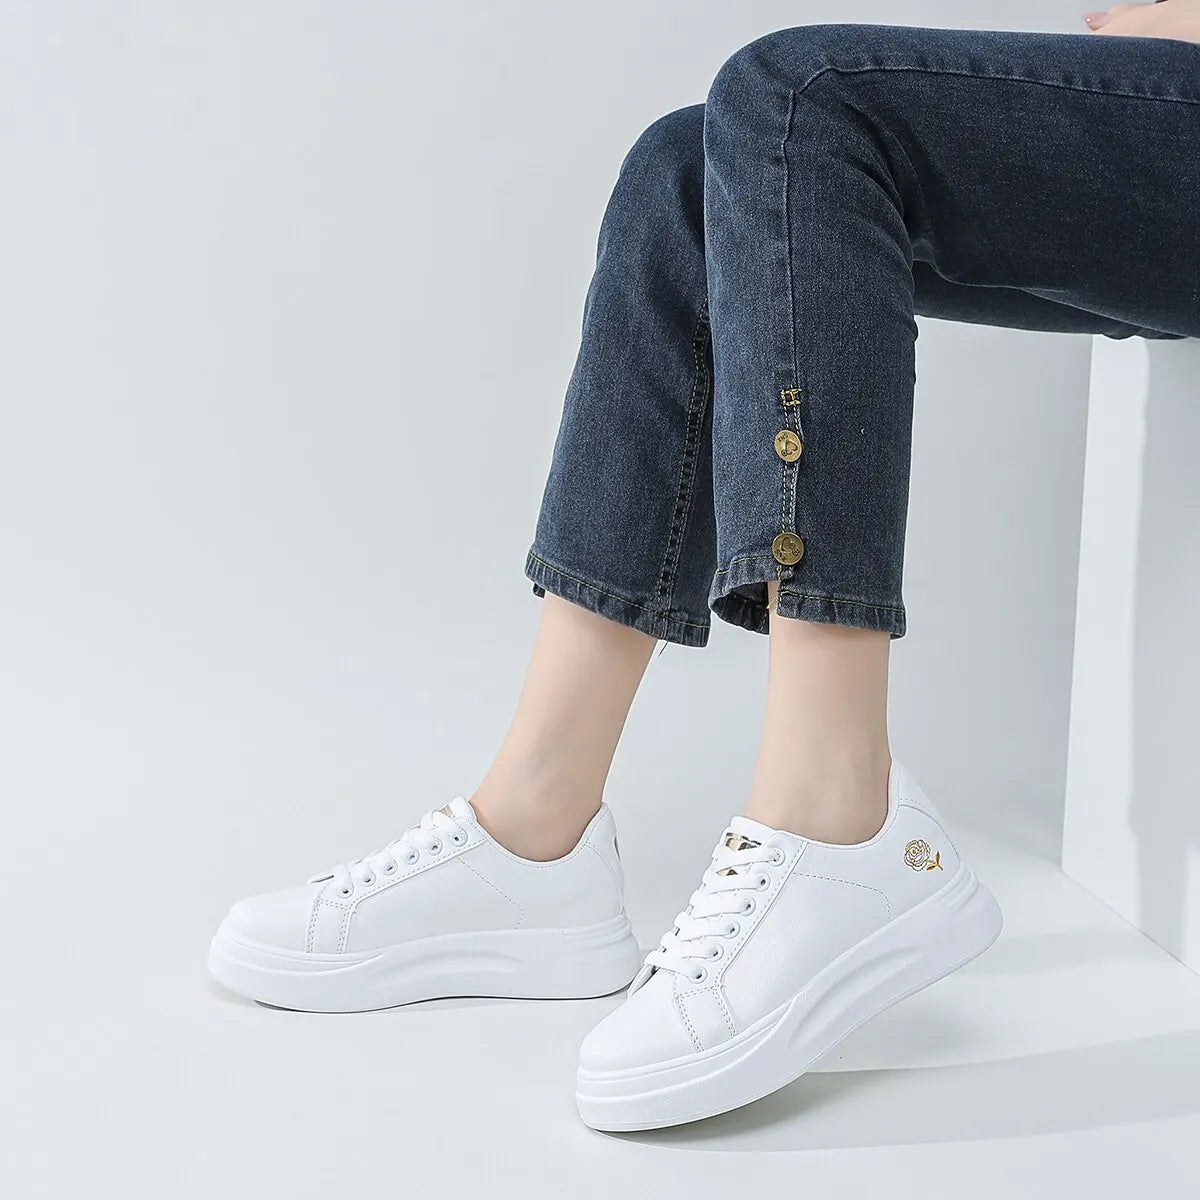 Women's Stylish Lace-Up Skate White Floral Embroidered Sneakers